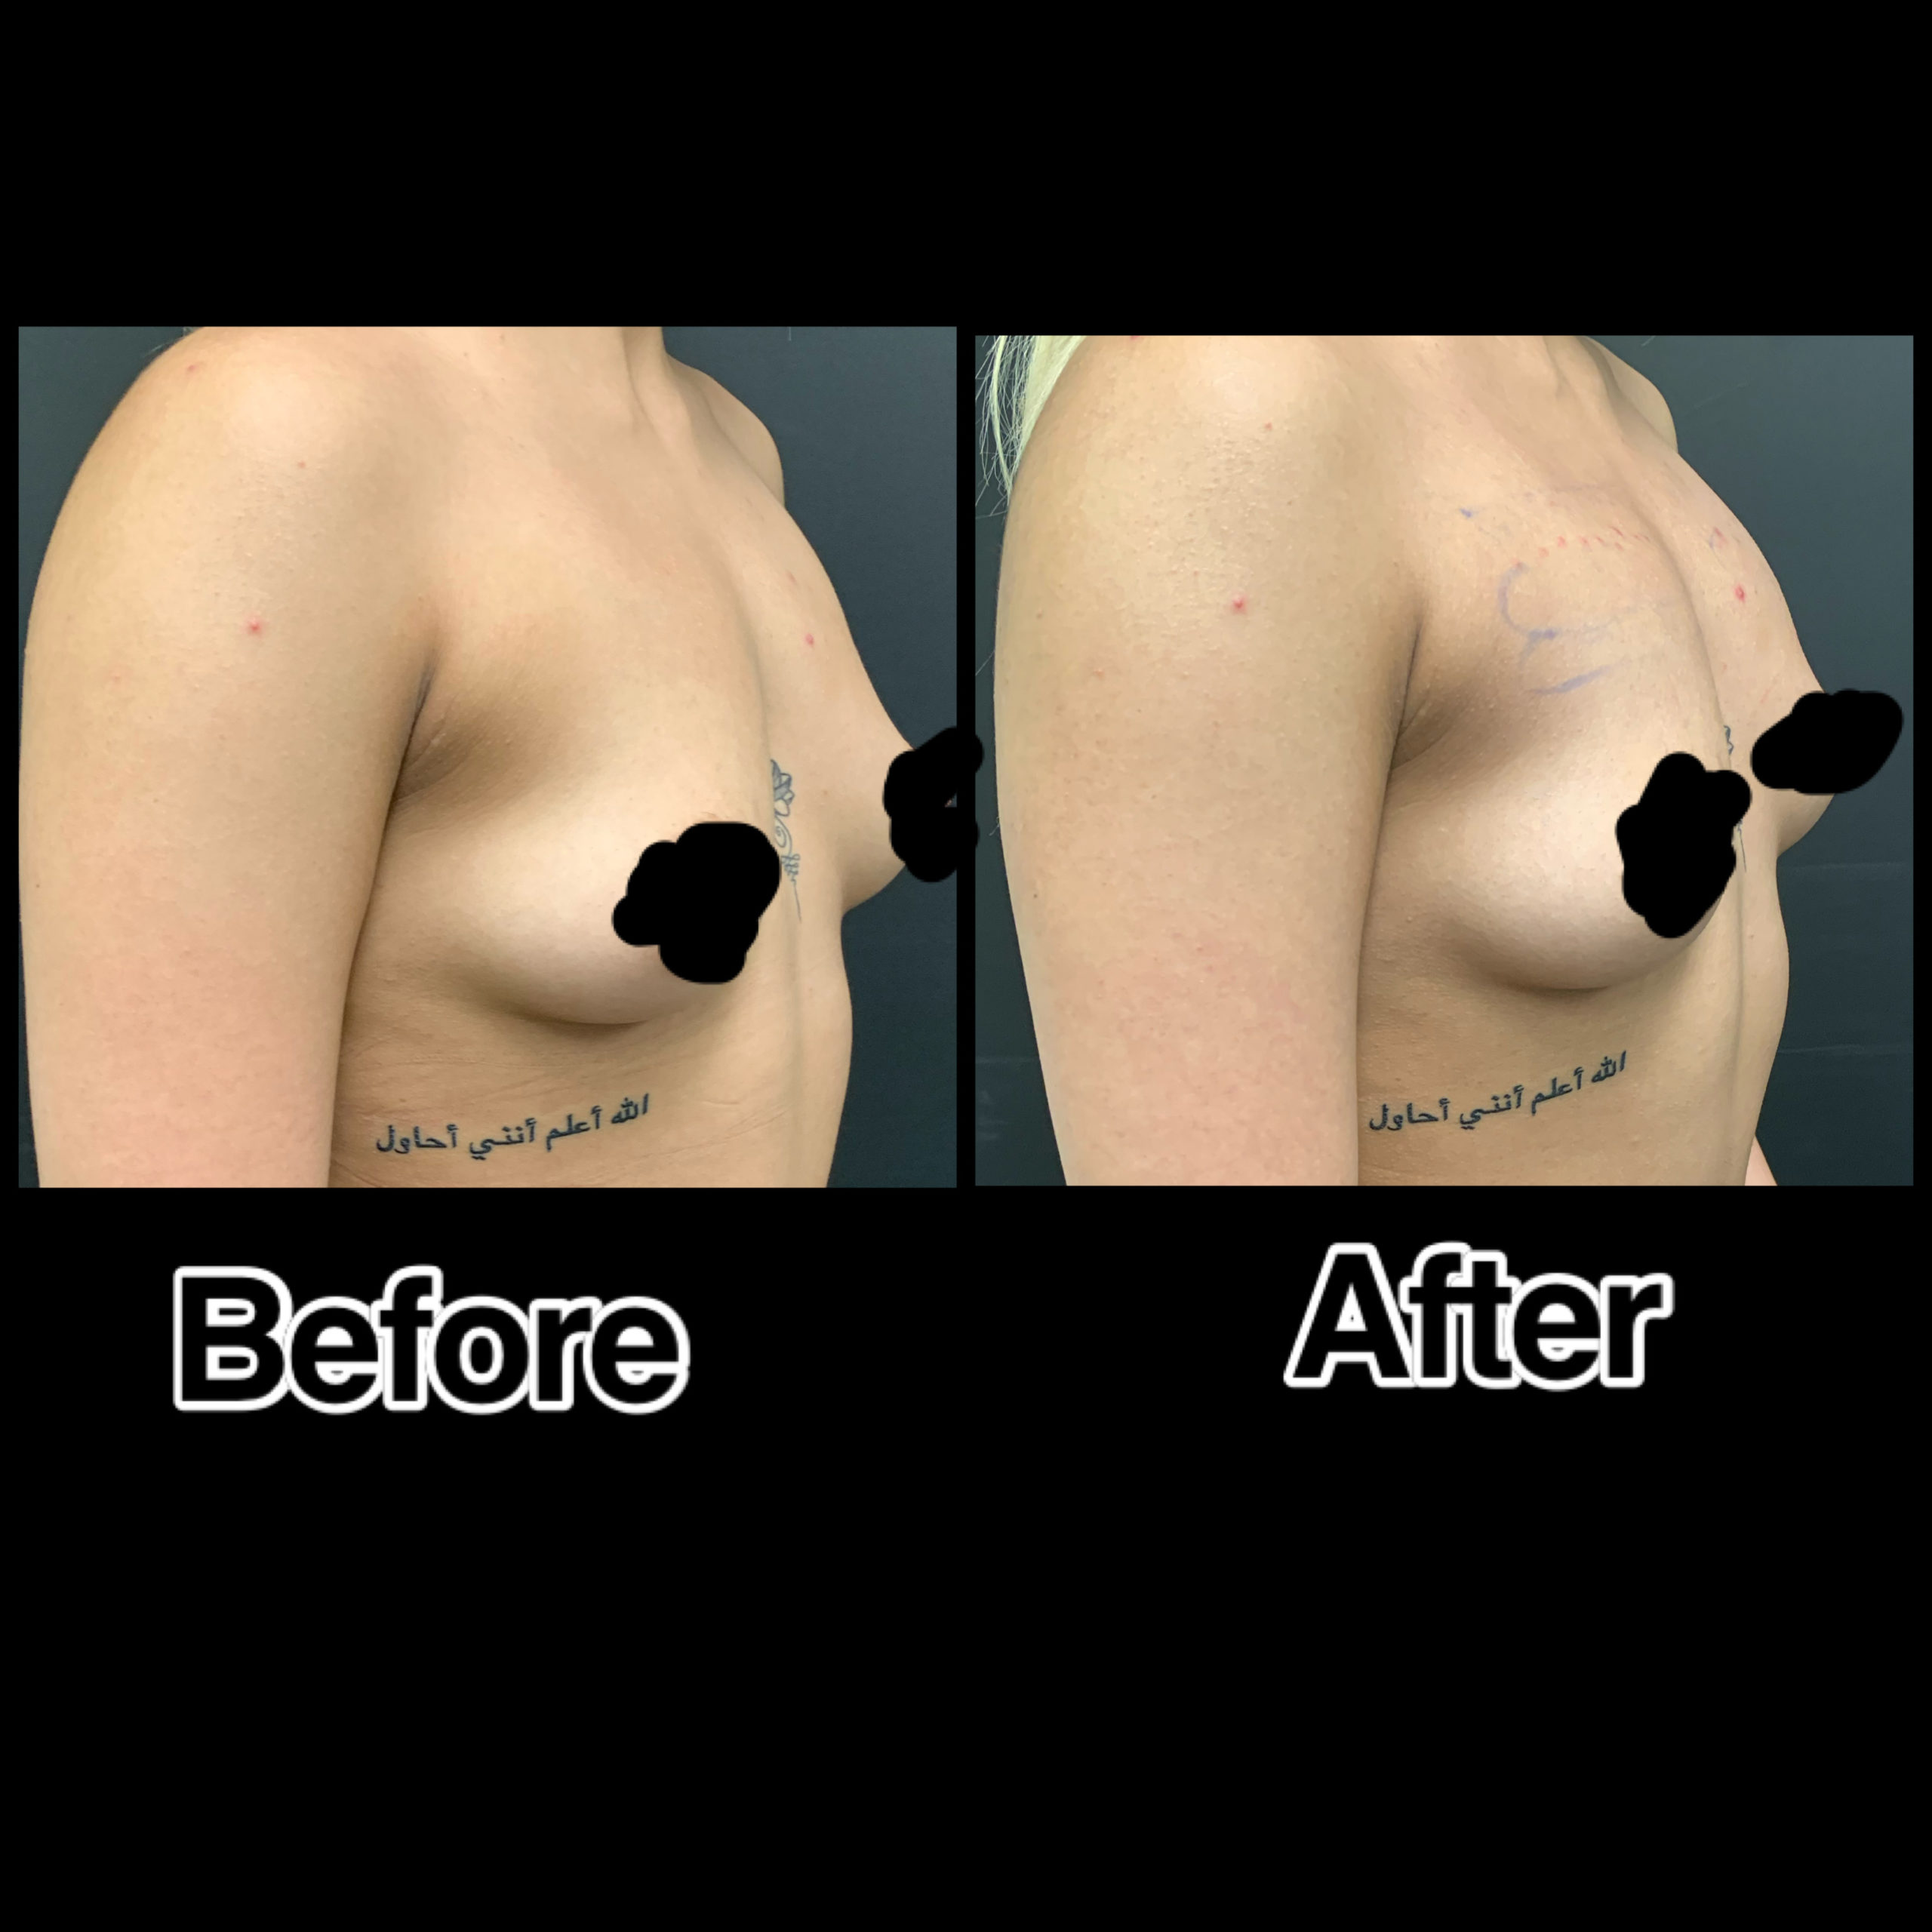 Sculptra Breast Lift Before & After Photos | The Better Body Shop MedSpa In Houston, TX